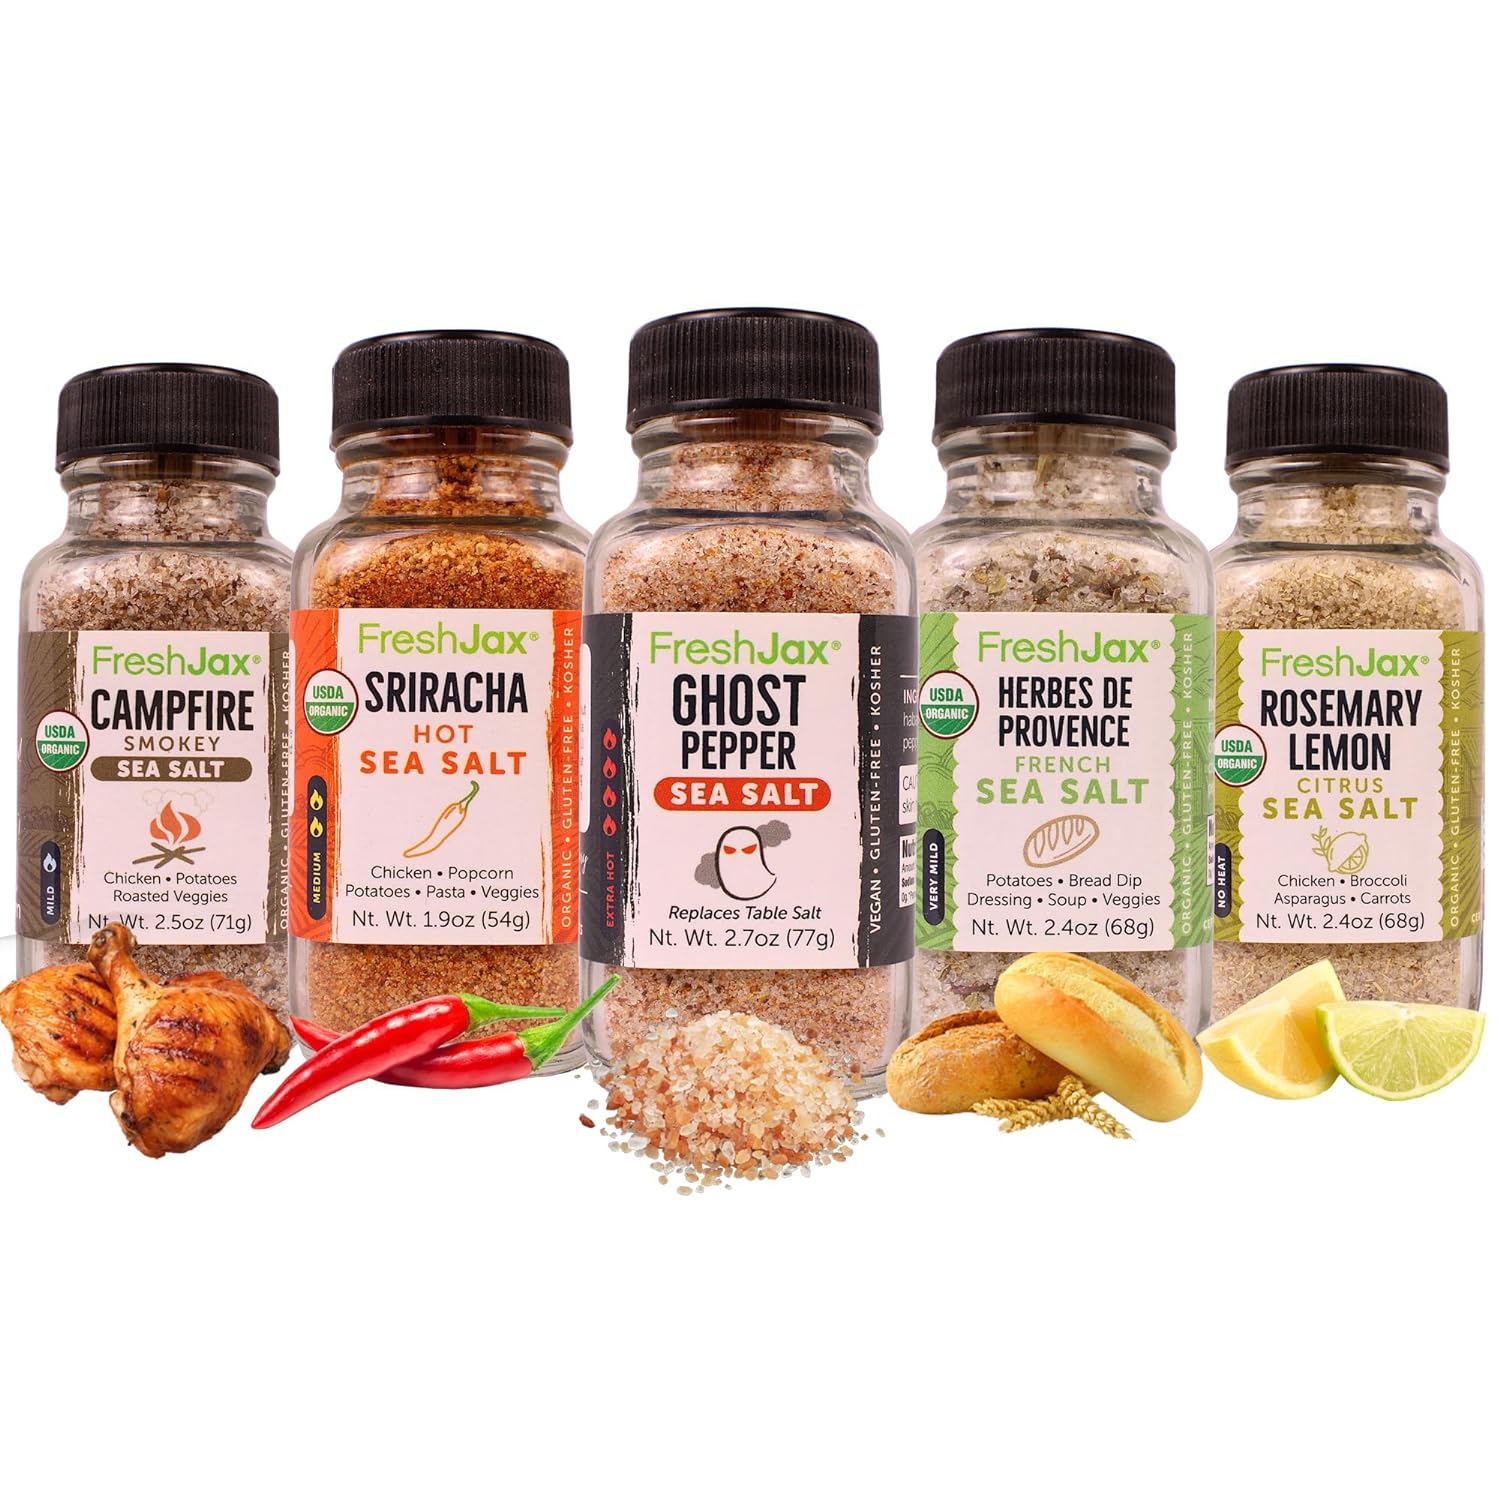 FreshJax Seasoned Sea Salt Gift Set | Pack of 5 Sea Salt Organic Seasoning | Grilling Gifts for Dad, Father | Flavored Salt Spice Set Packed in a Giftable Box